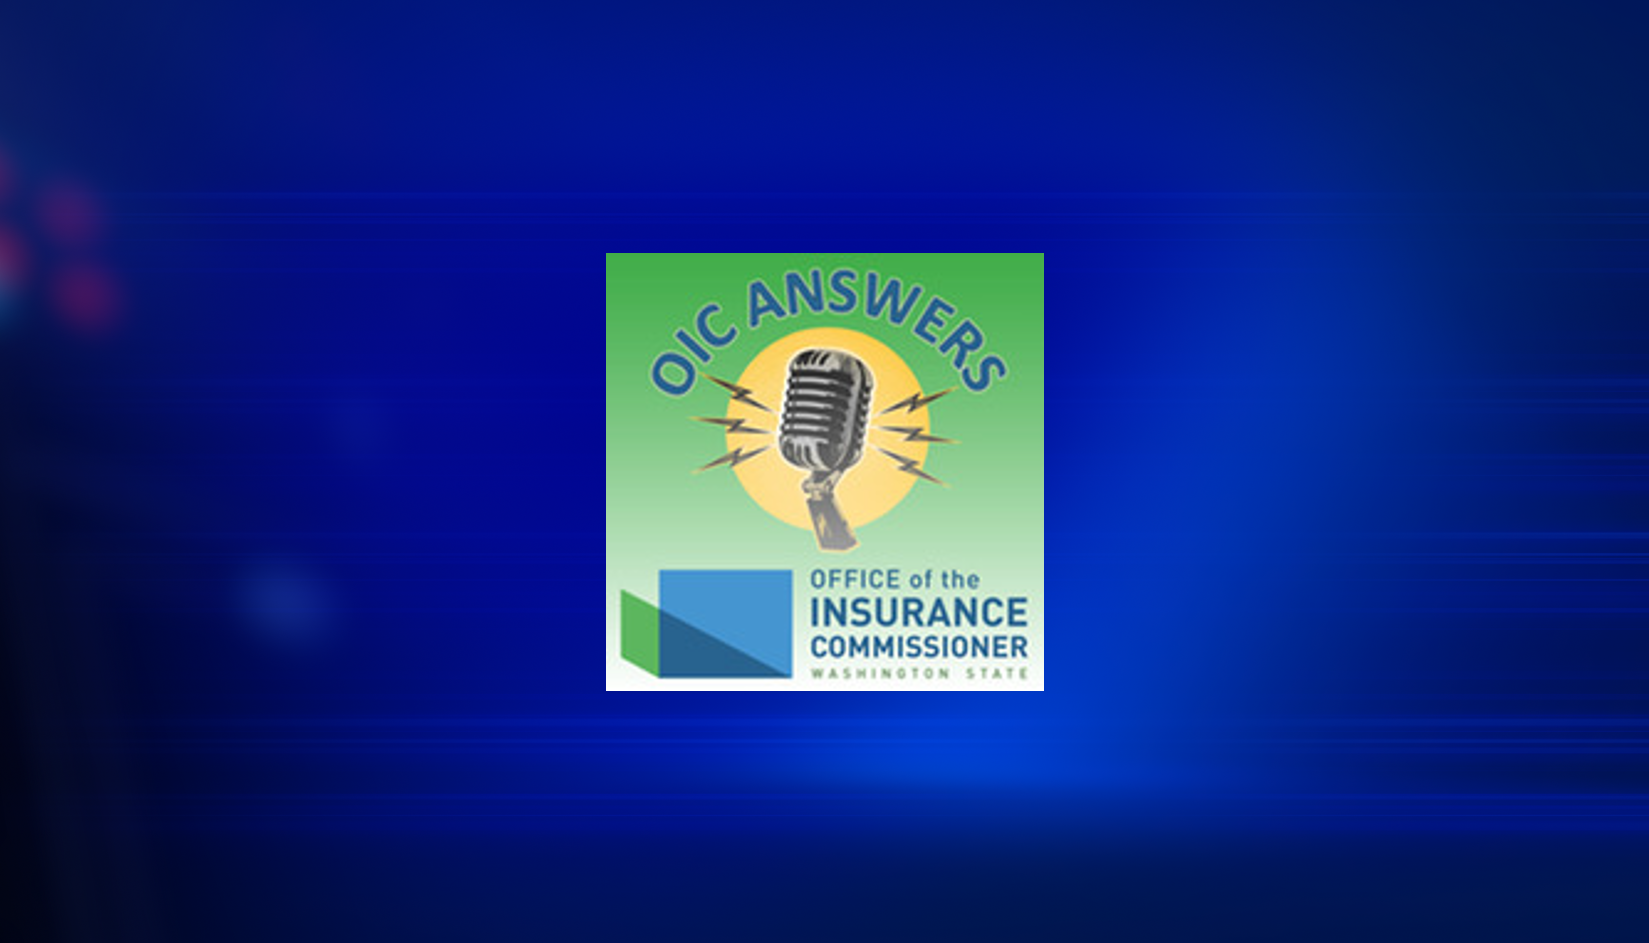 Washington Office of the Insurance Commissioner launches new podcast [Video]